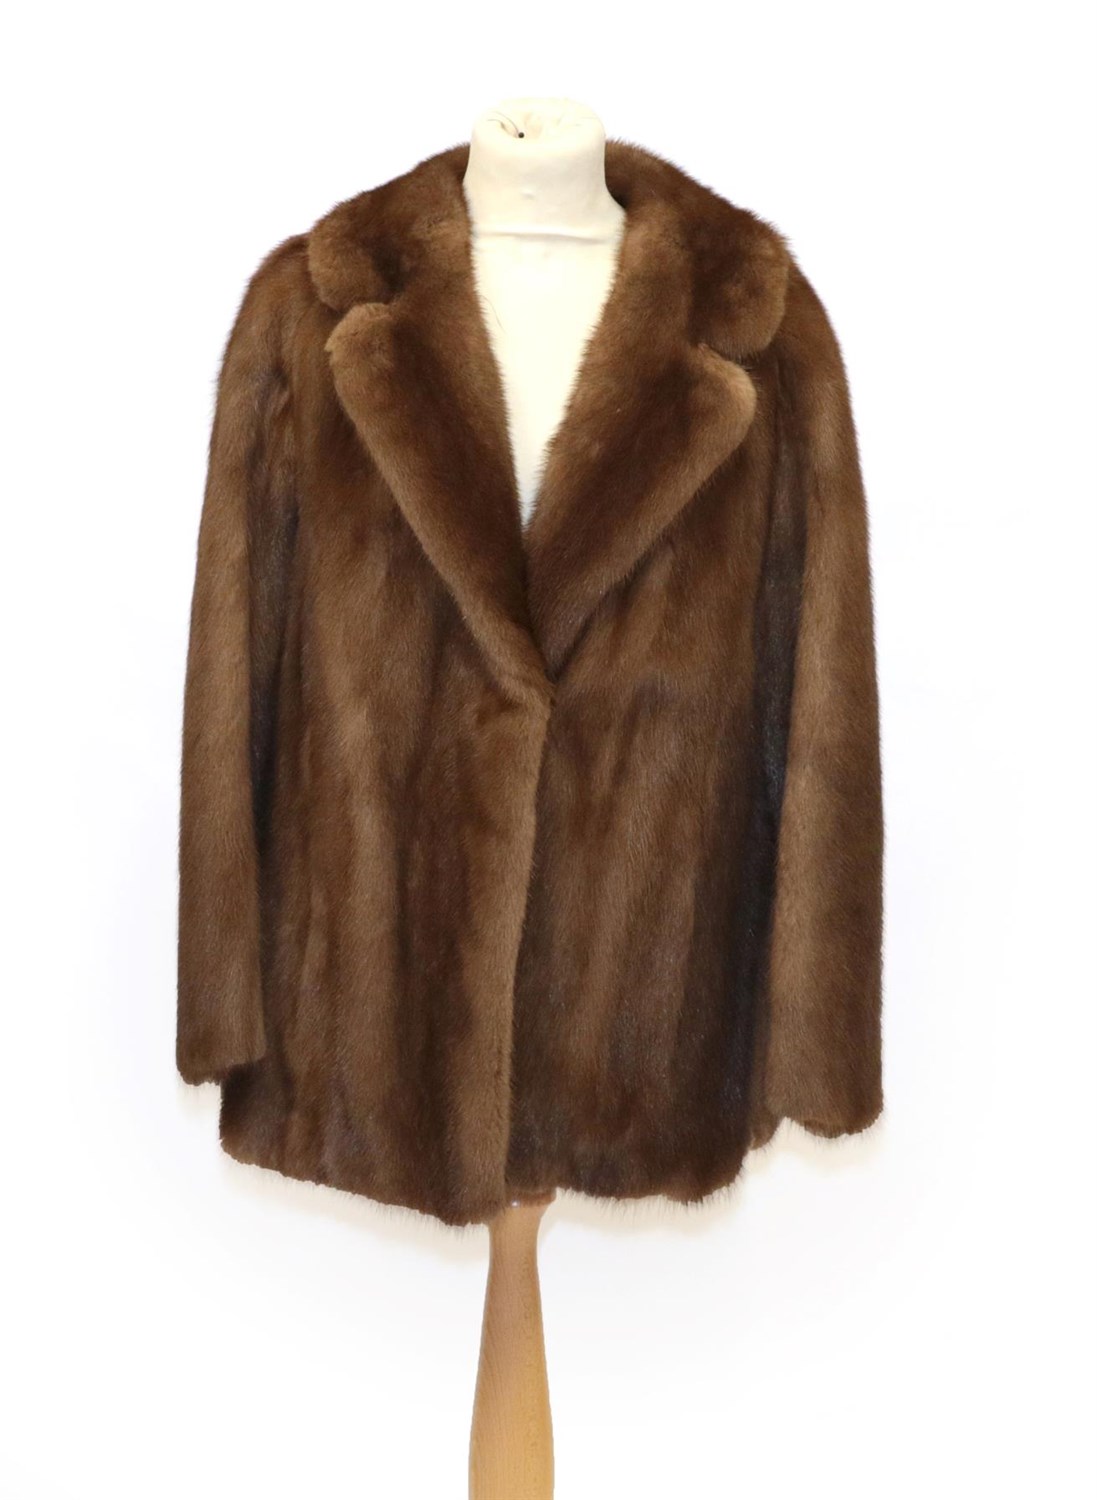 Lot 6225 - Sacks and Brendlor Furriers Brown Mink Short Jacket, with splits to the side seam